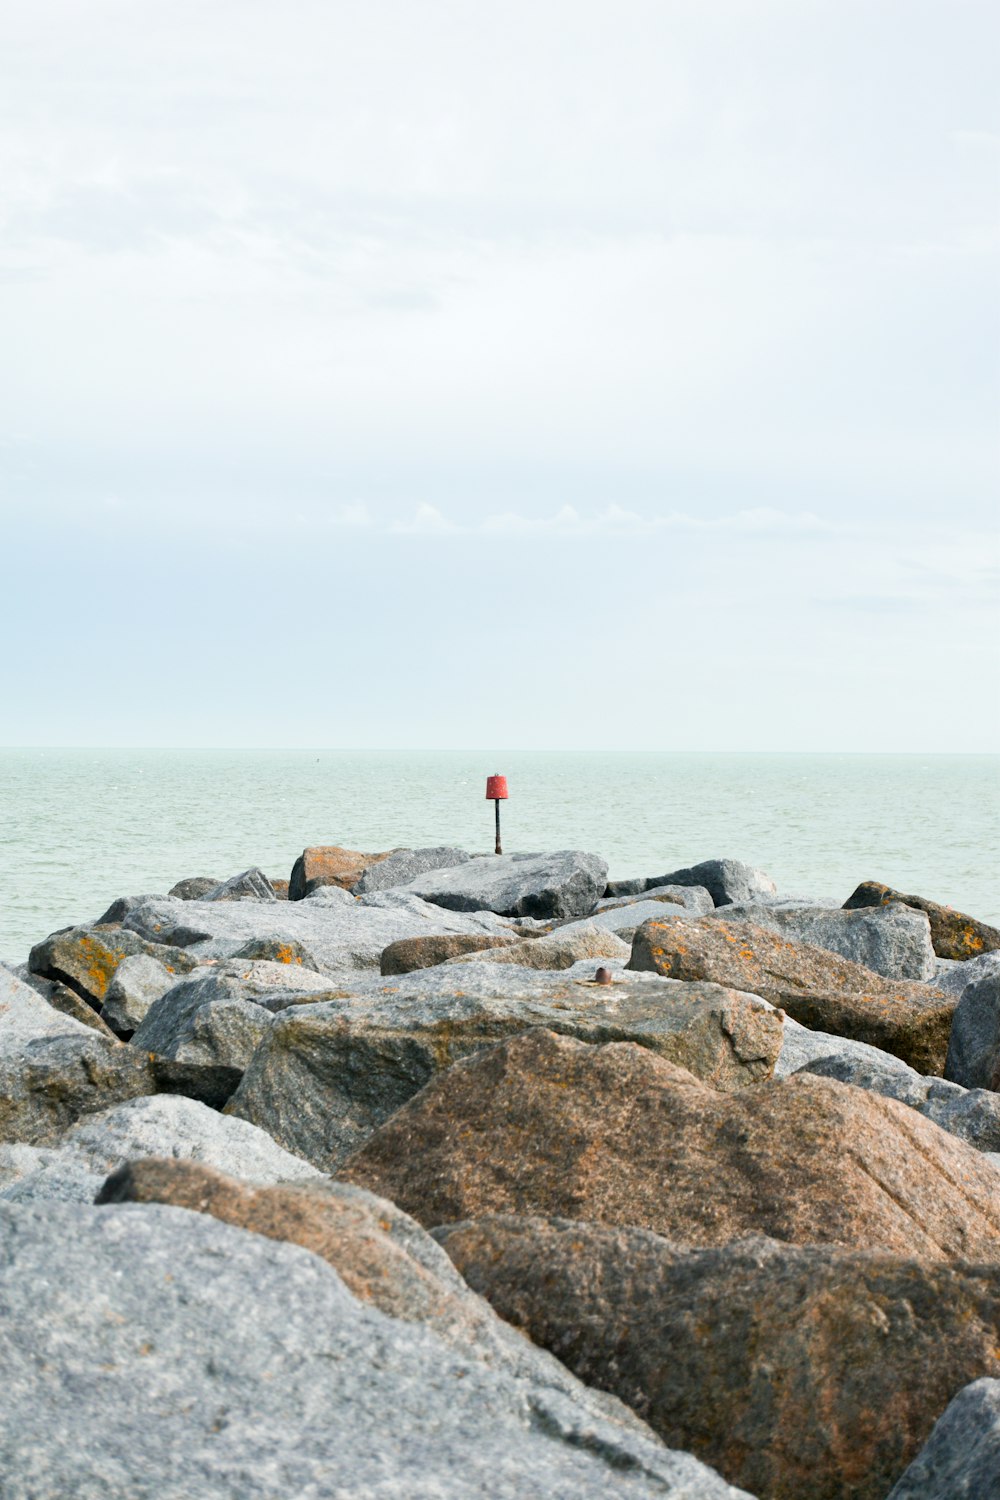 person in red shirt standing on gray rock near body of water during daytime